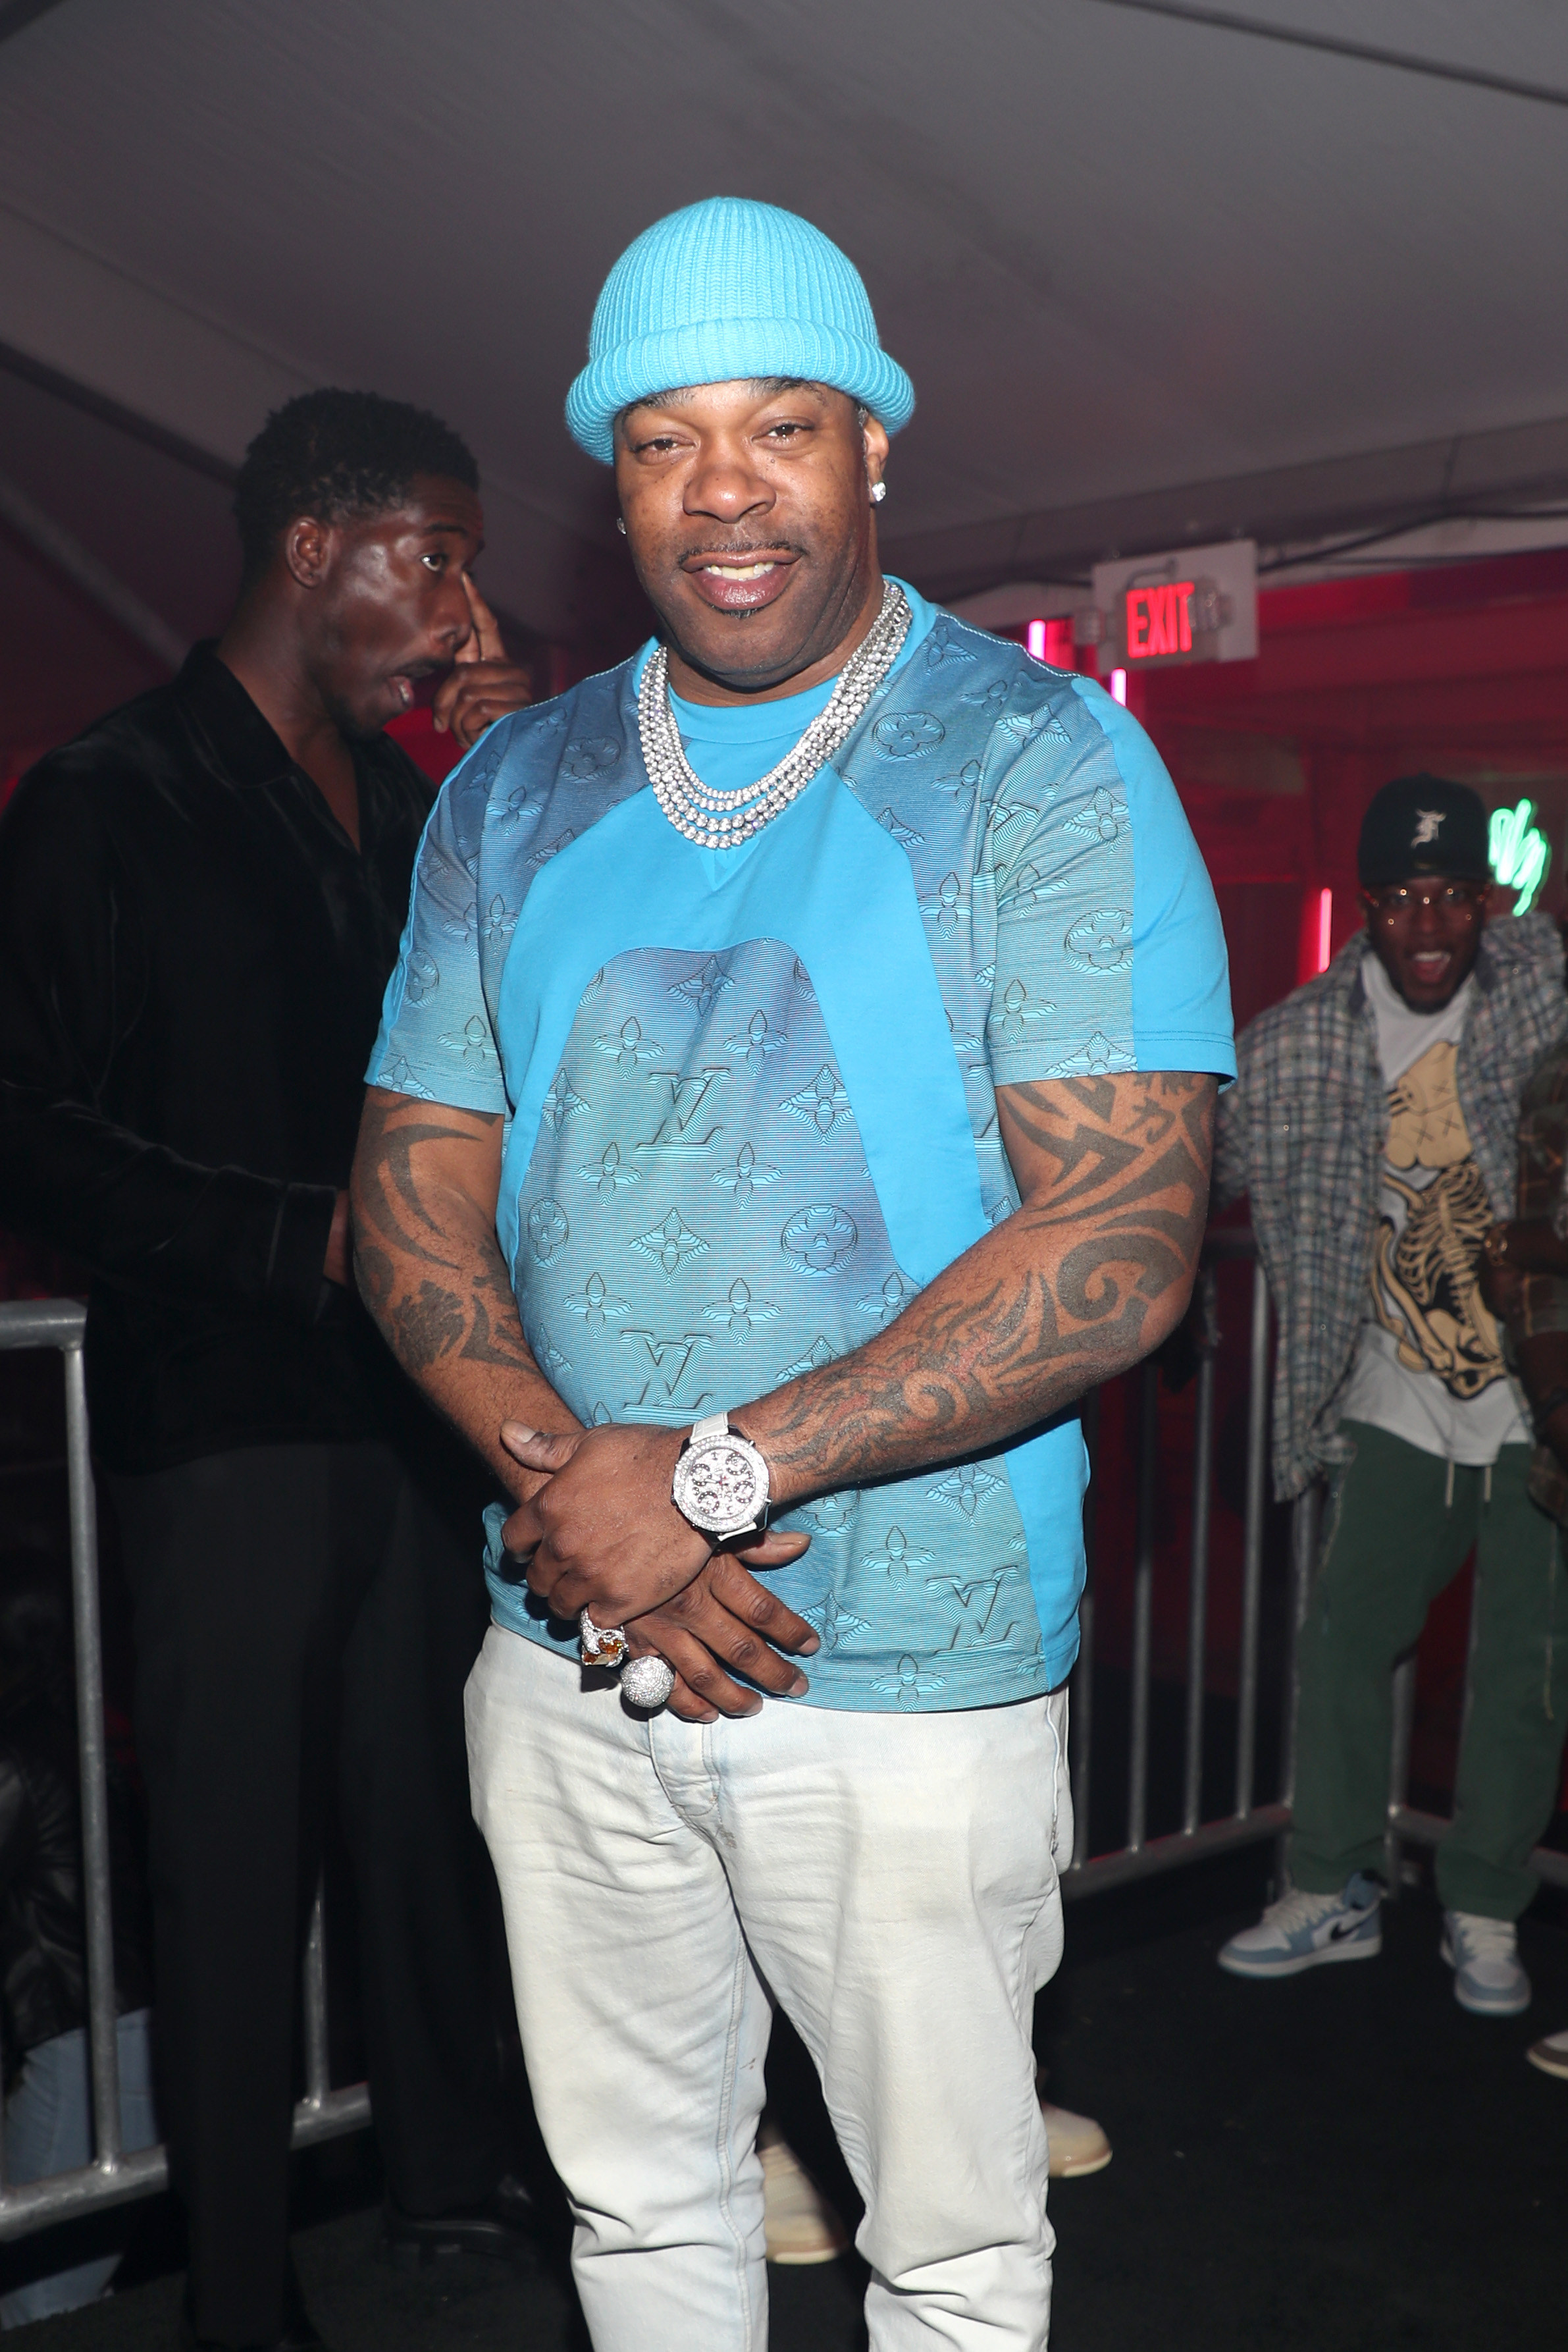 Busta Rhymes standing and smiling at a venue